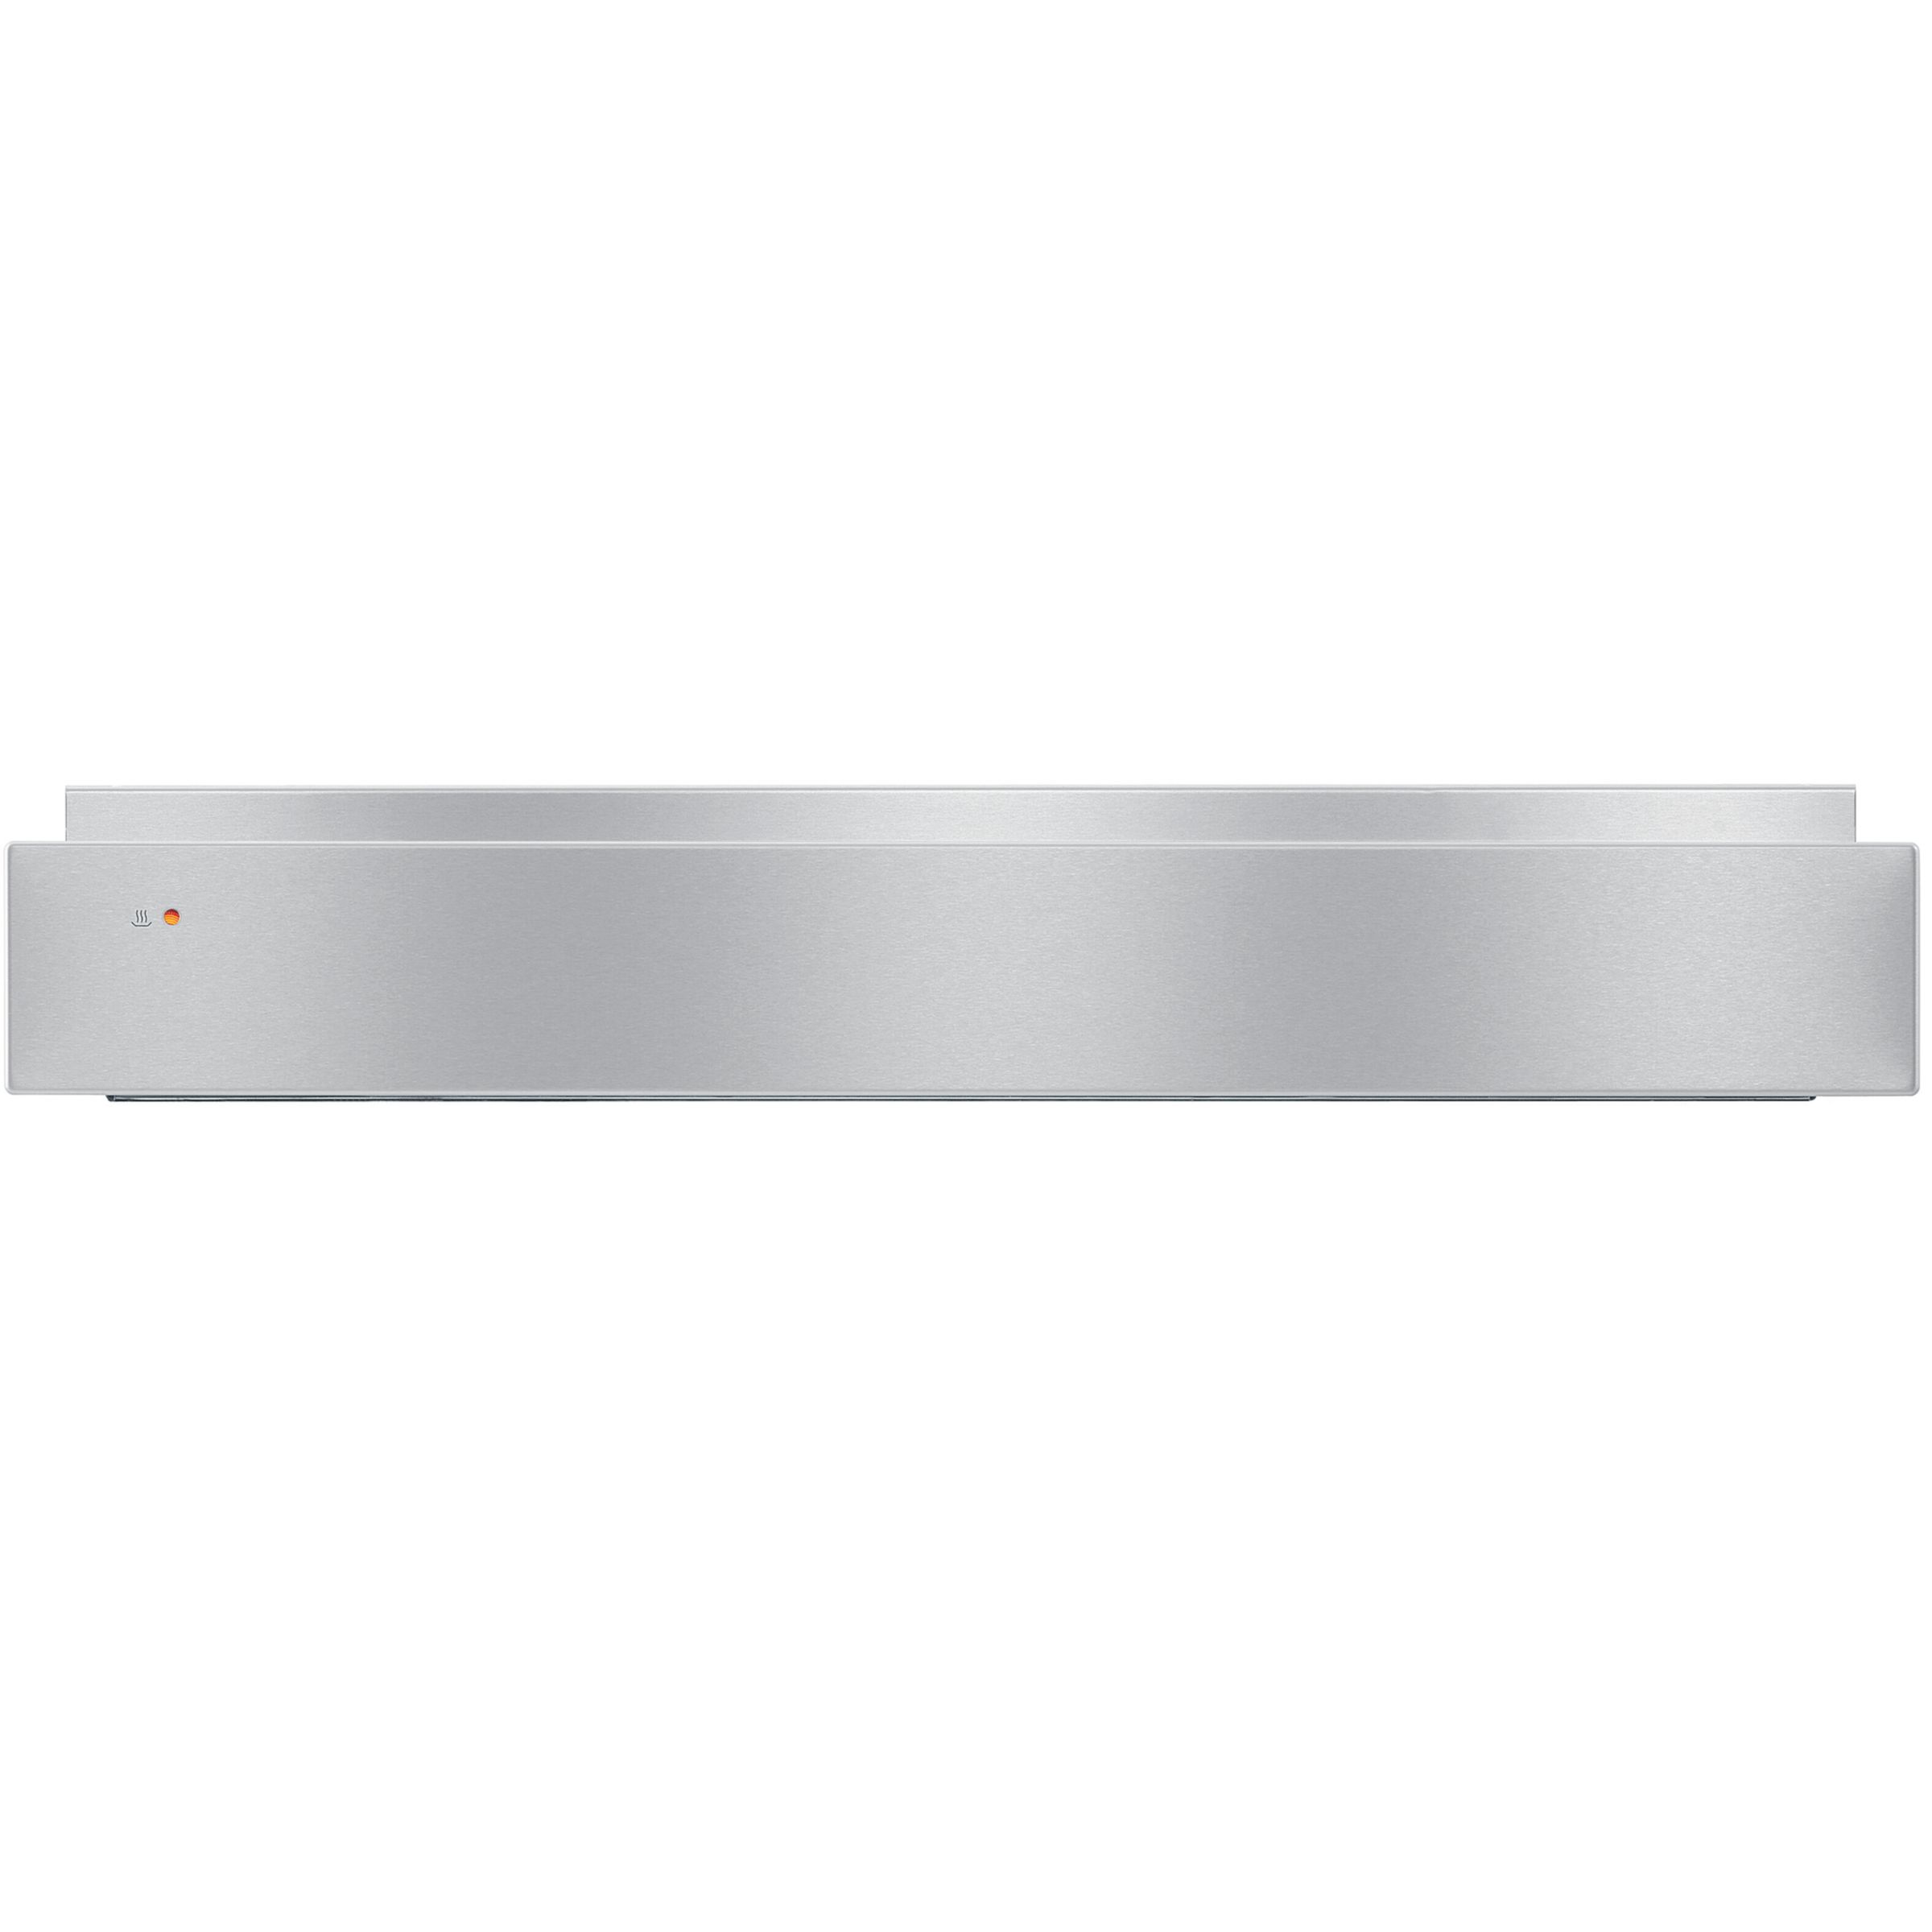 Miele EGW3060-10 Built-In Warming Drawer, Stainless Steel at John Lewis